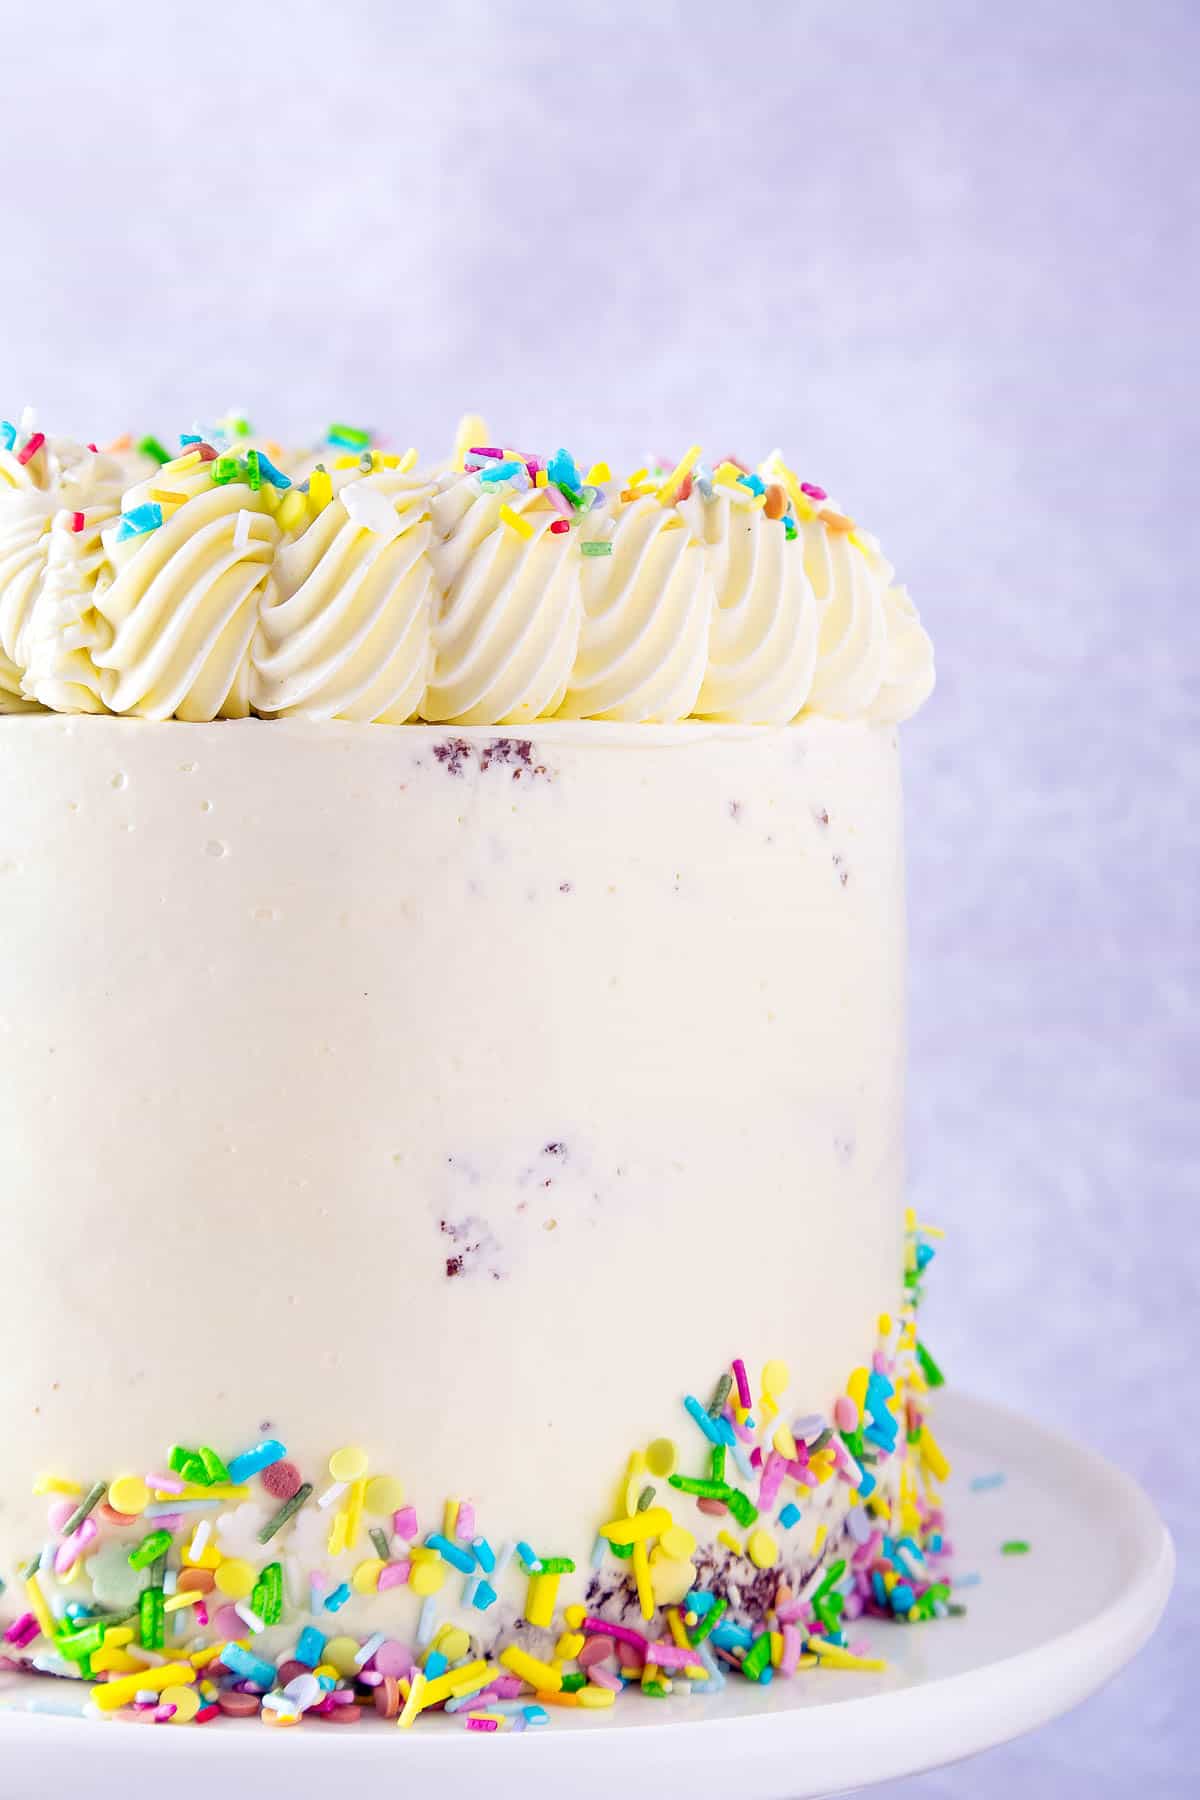 Vanilla cake iced with buttercream and decorated with sprinkles